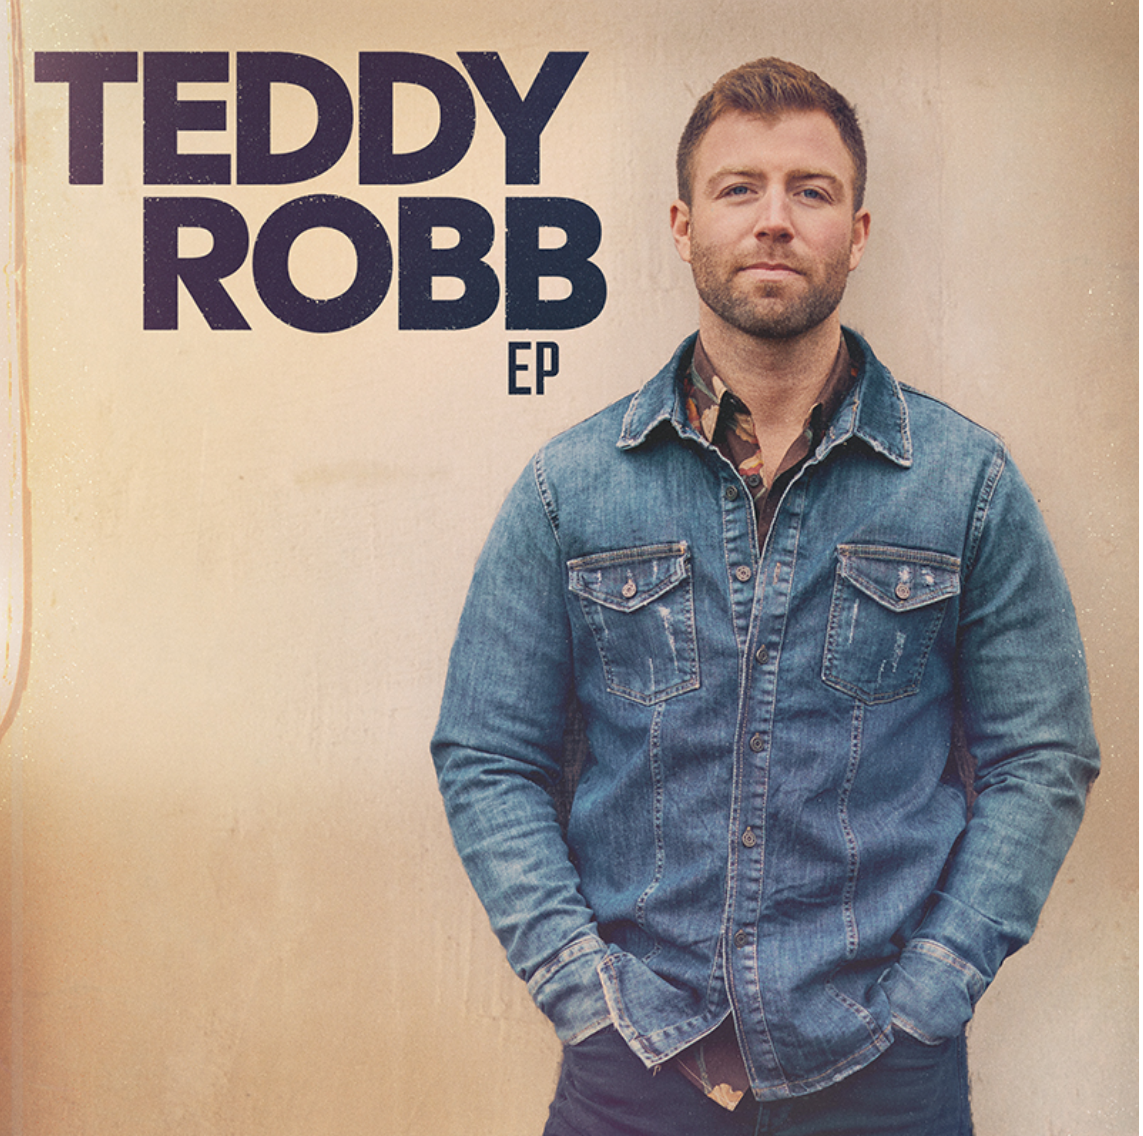 Teddy Robb EP.PNG